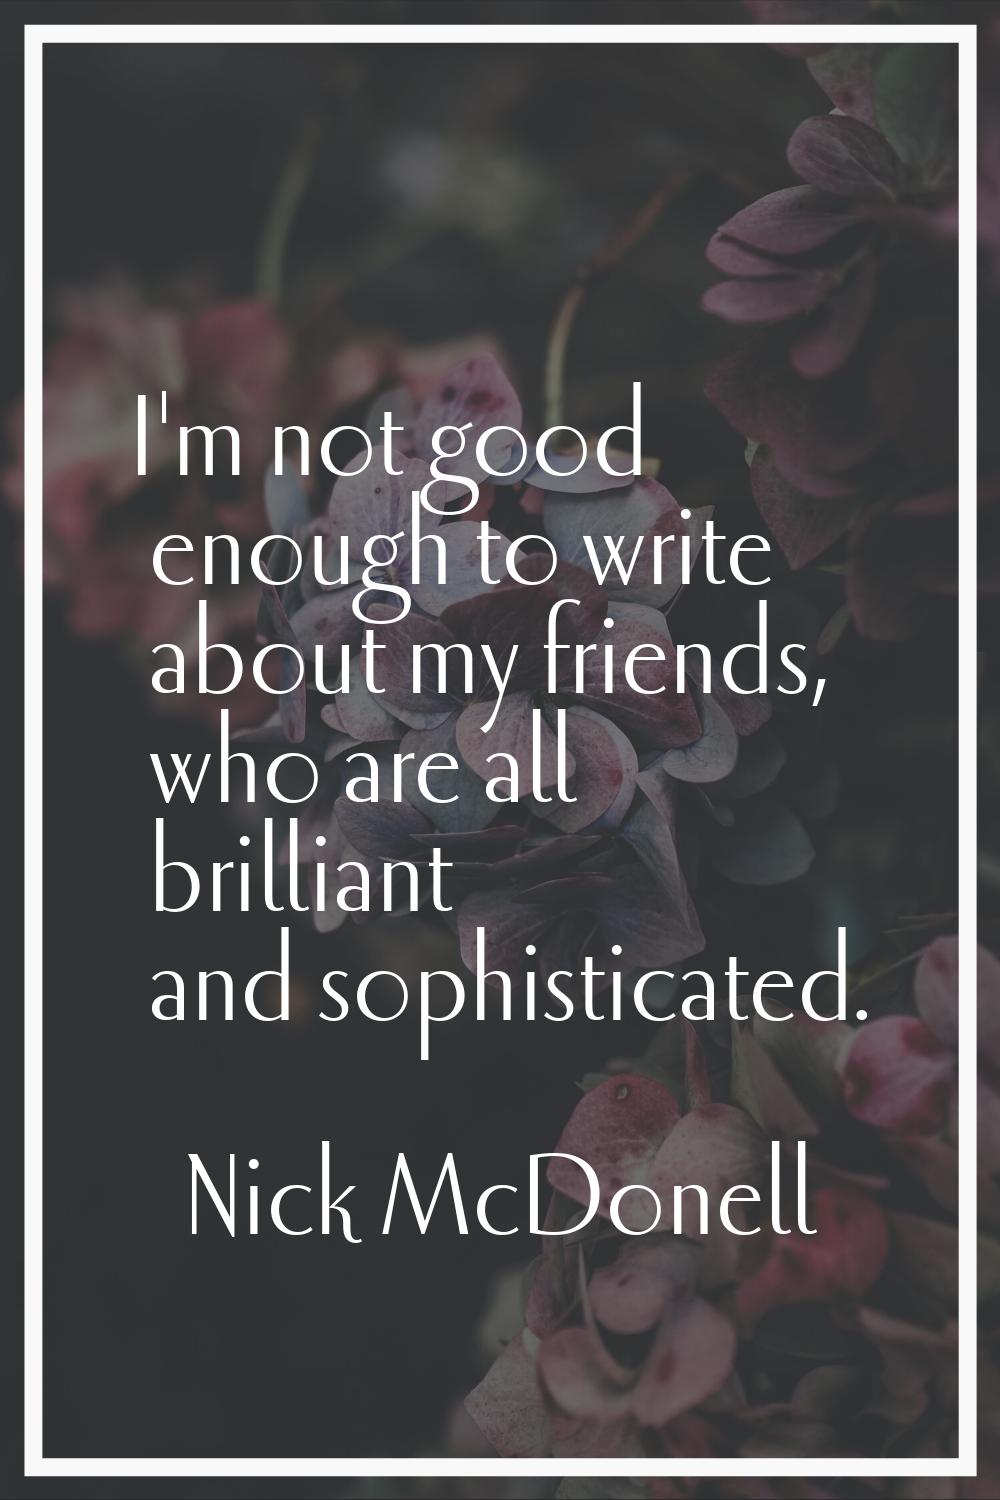 I'm not good enough to write about my friends, who are all brilliant and sophisticated.